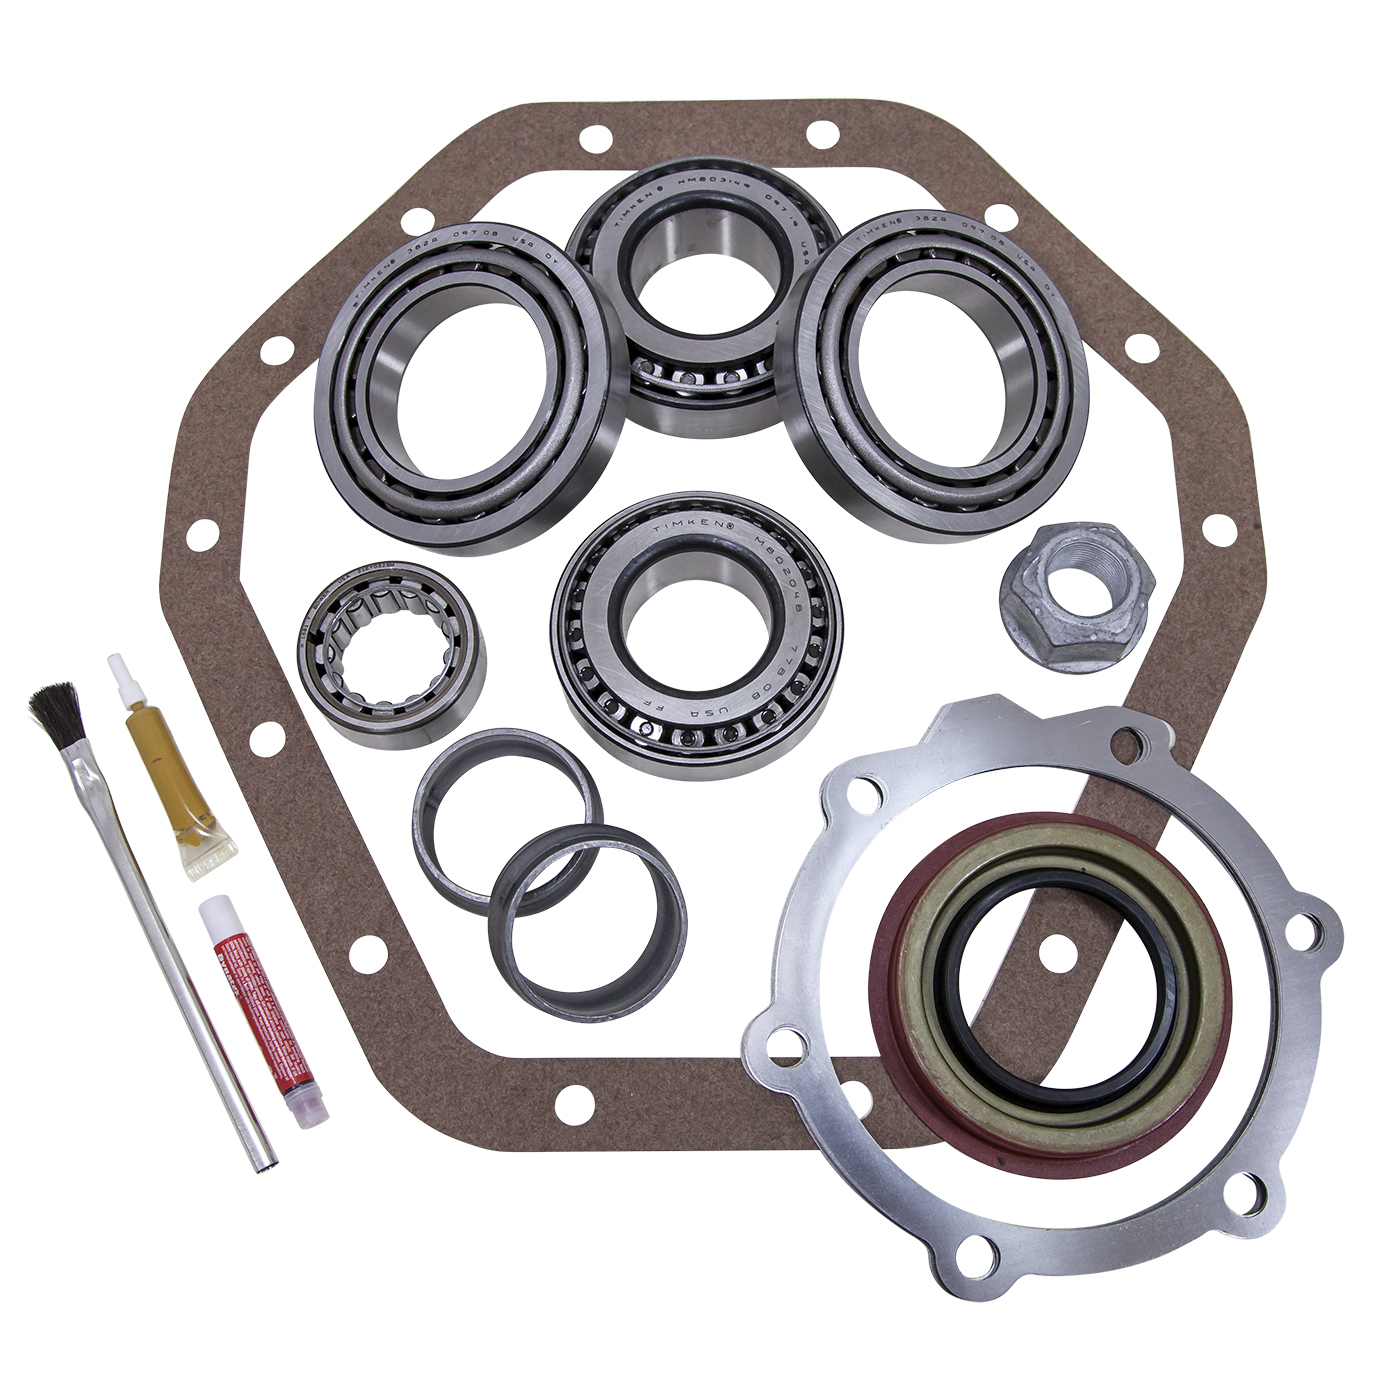 USA Standard Master Overhaul kit for '88 and older GM 10.5" 14T differential